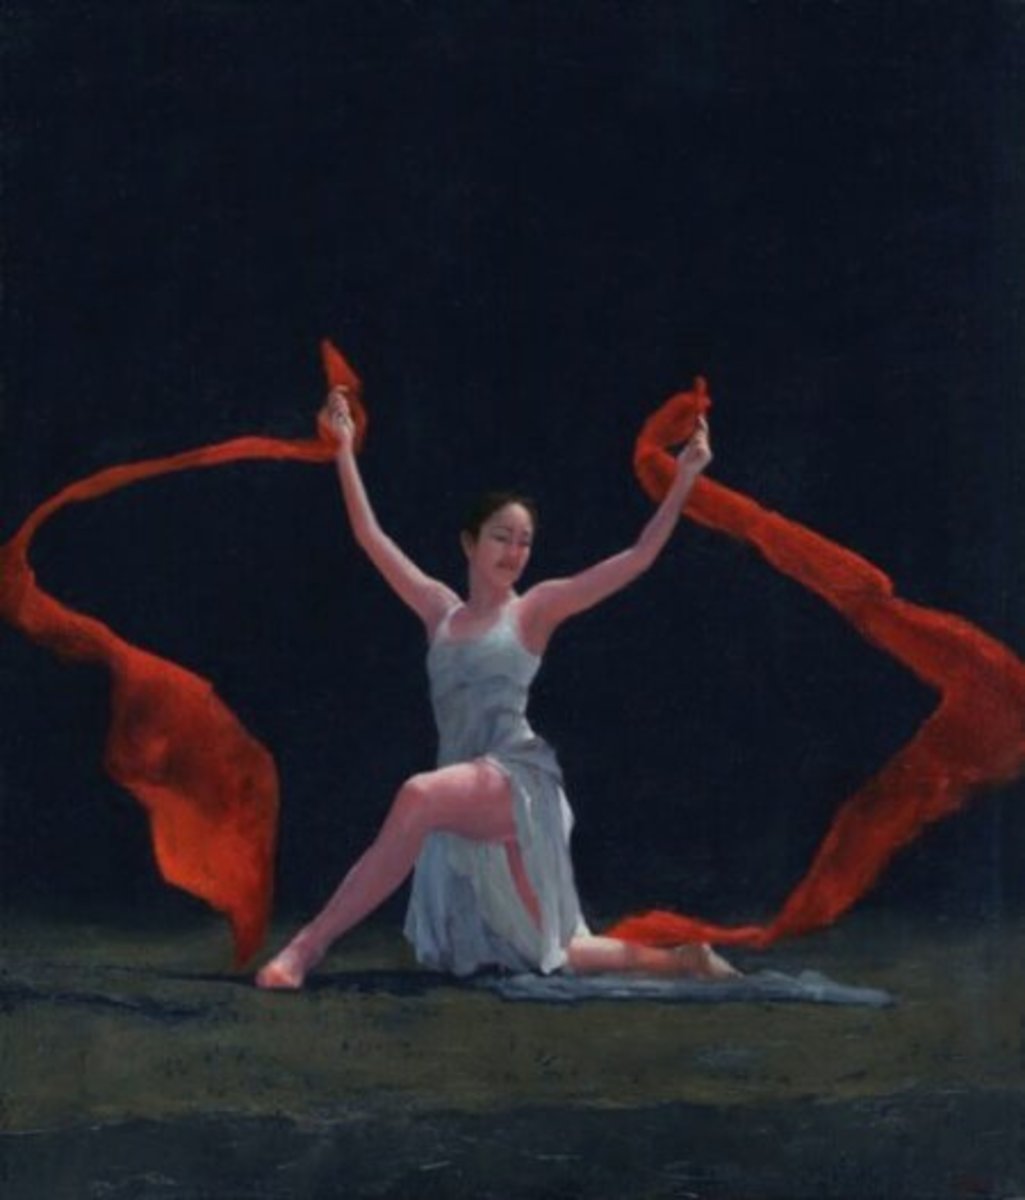  Ribbon Dance, Study" 12x14-oil on panel by Judy Nimtz (2014) framed, ready to hang. Retail: $1400